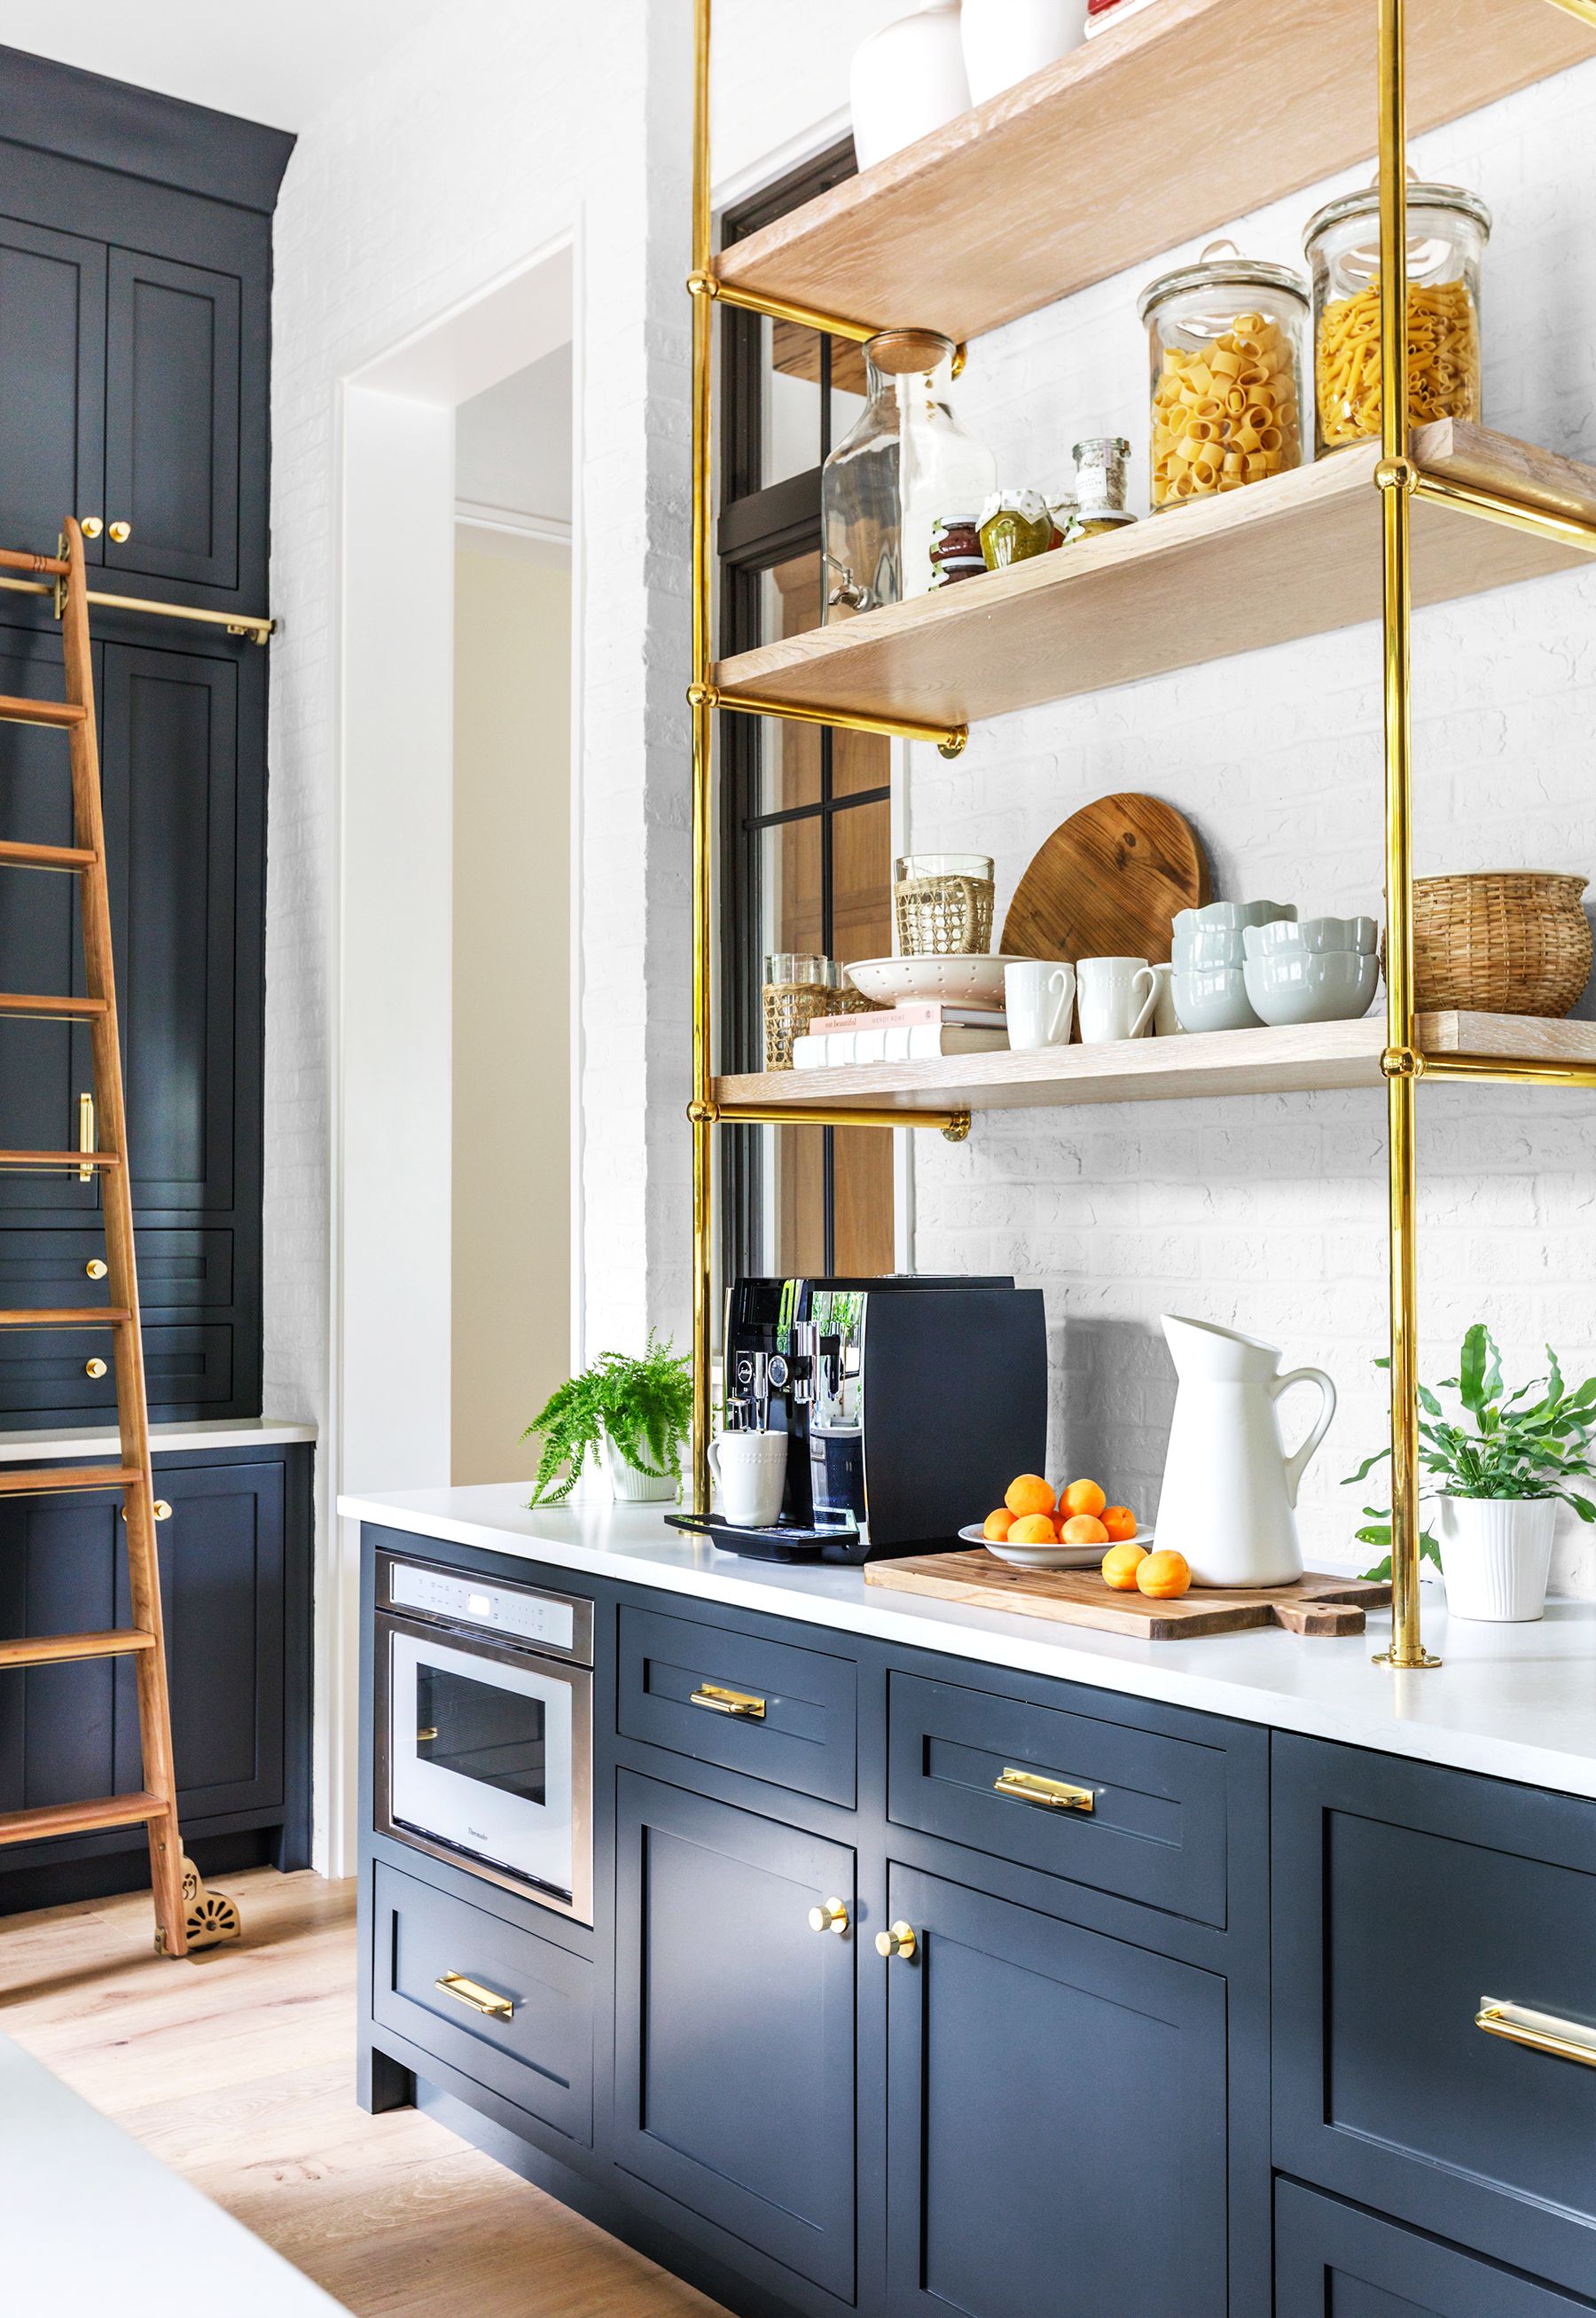 22 Kitchen Pantry Ideas for All Your Storage Needs